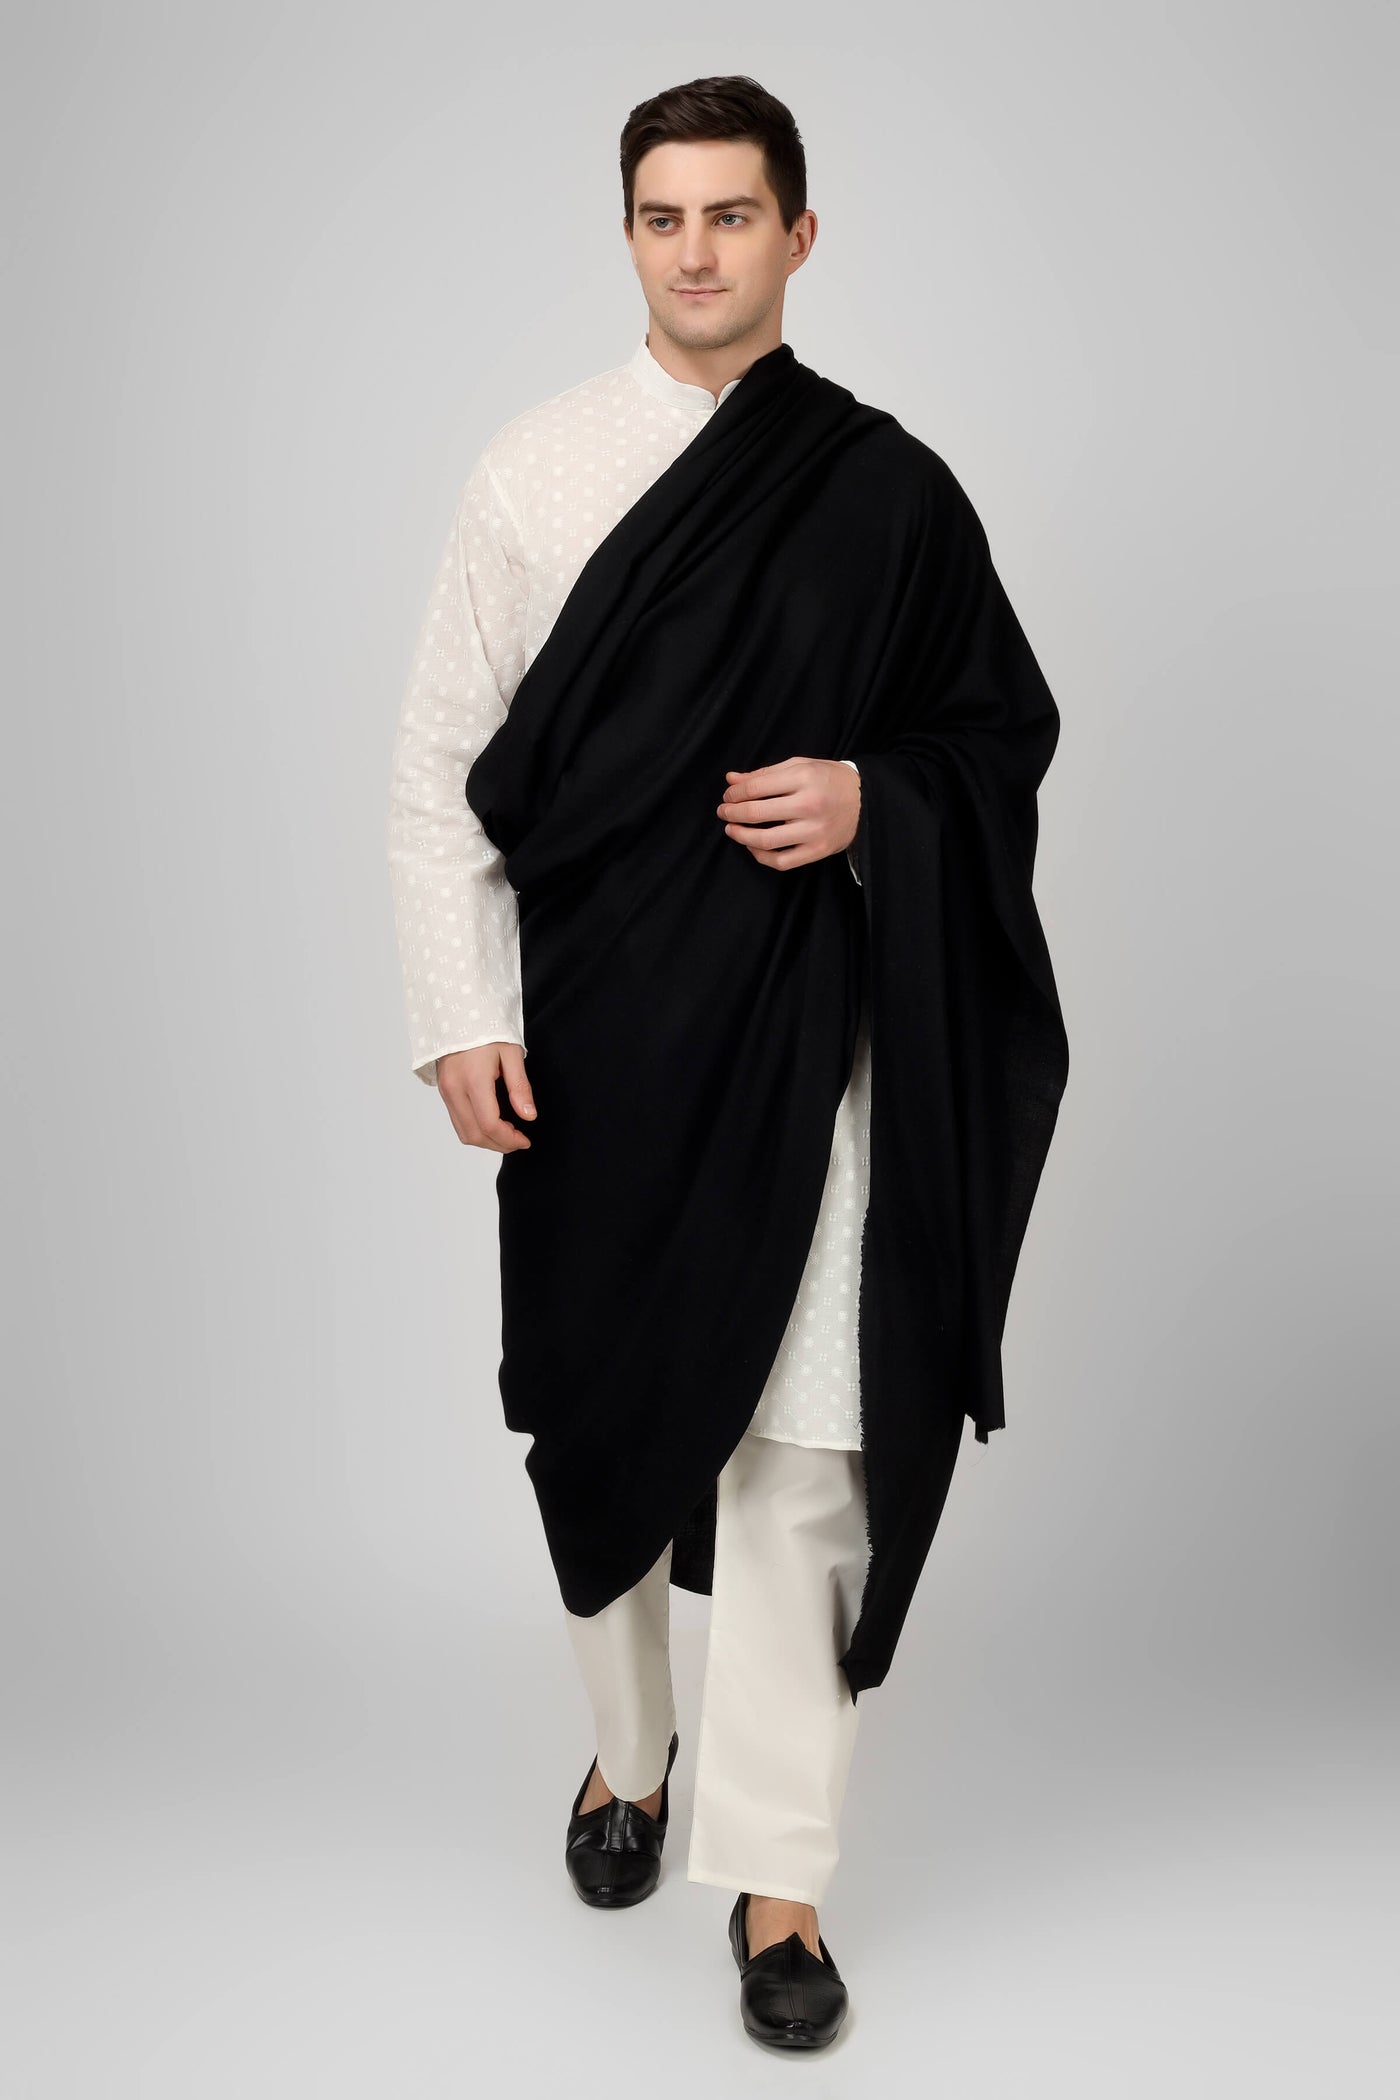  This Pashmina black mens shawl. It is crafted by the most talented Kashmiri Artisans with extreme skill and expertise. The skills represent the true craftsmanship of these Kashmiri Artisans. 